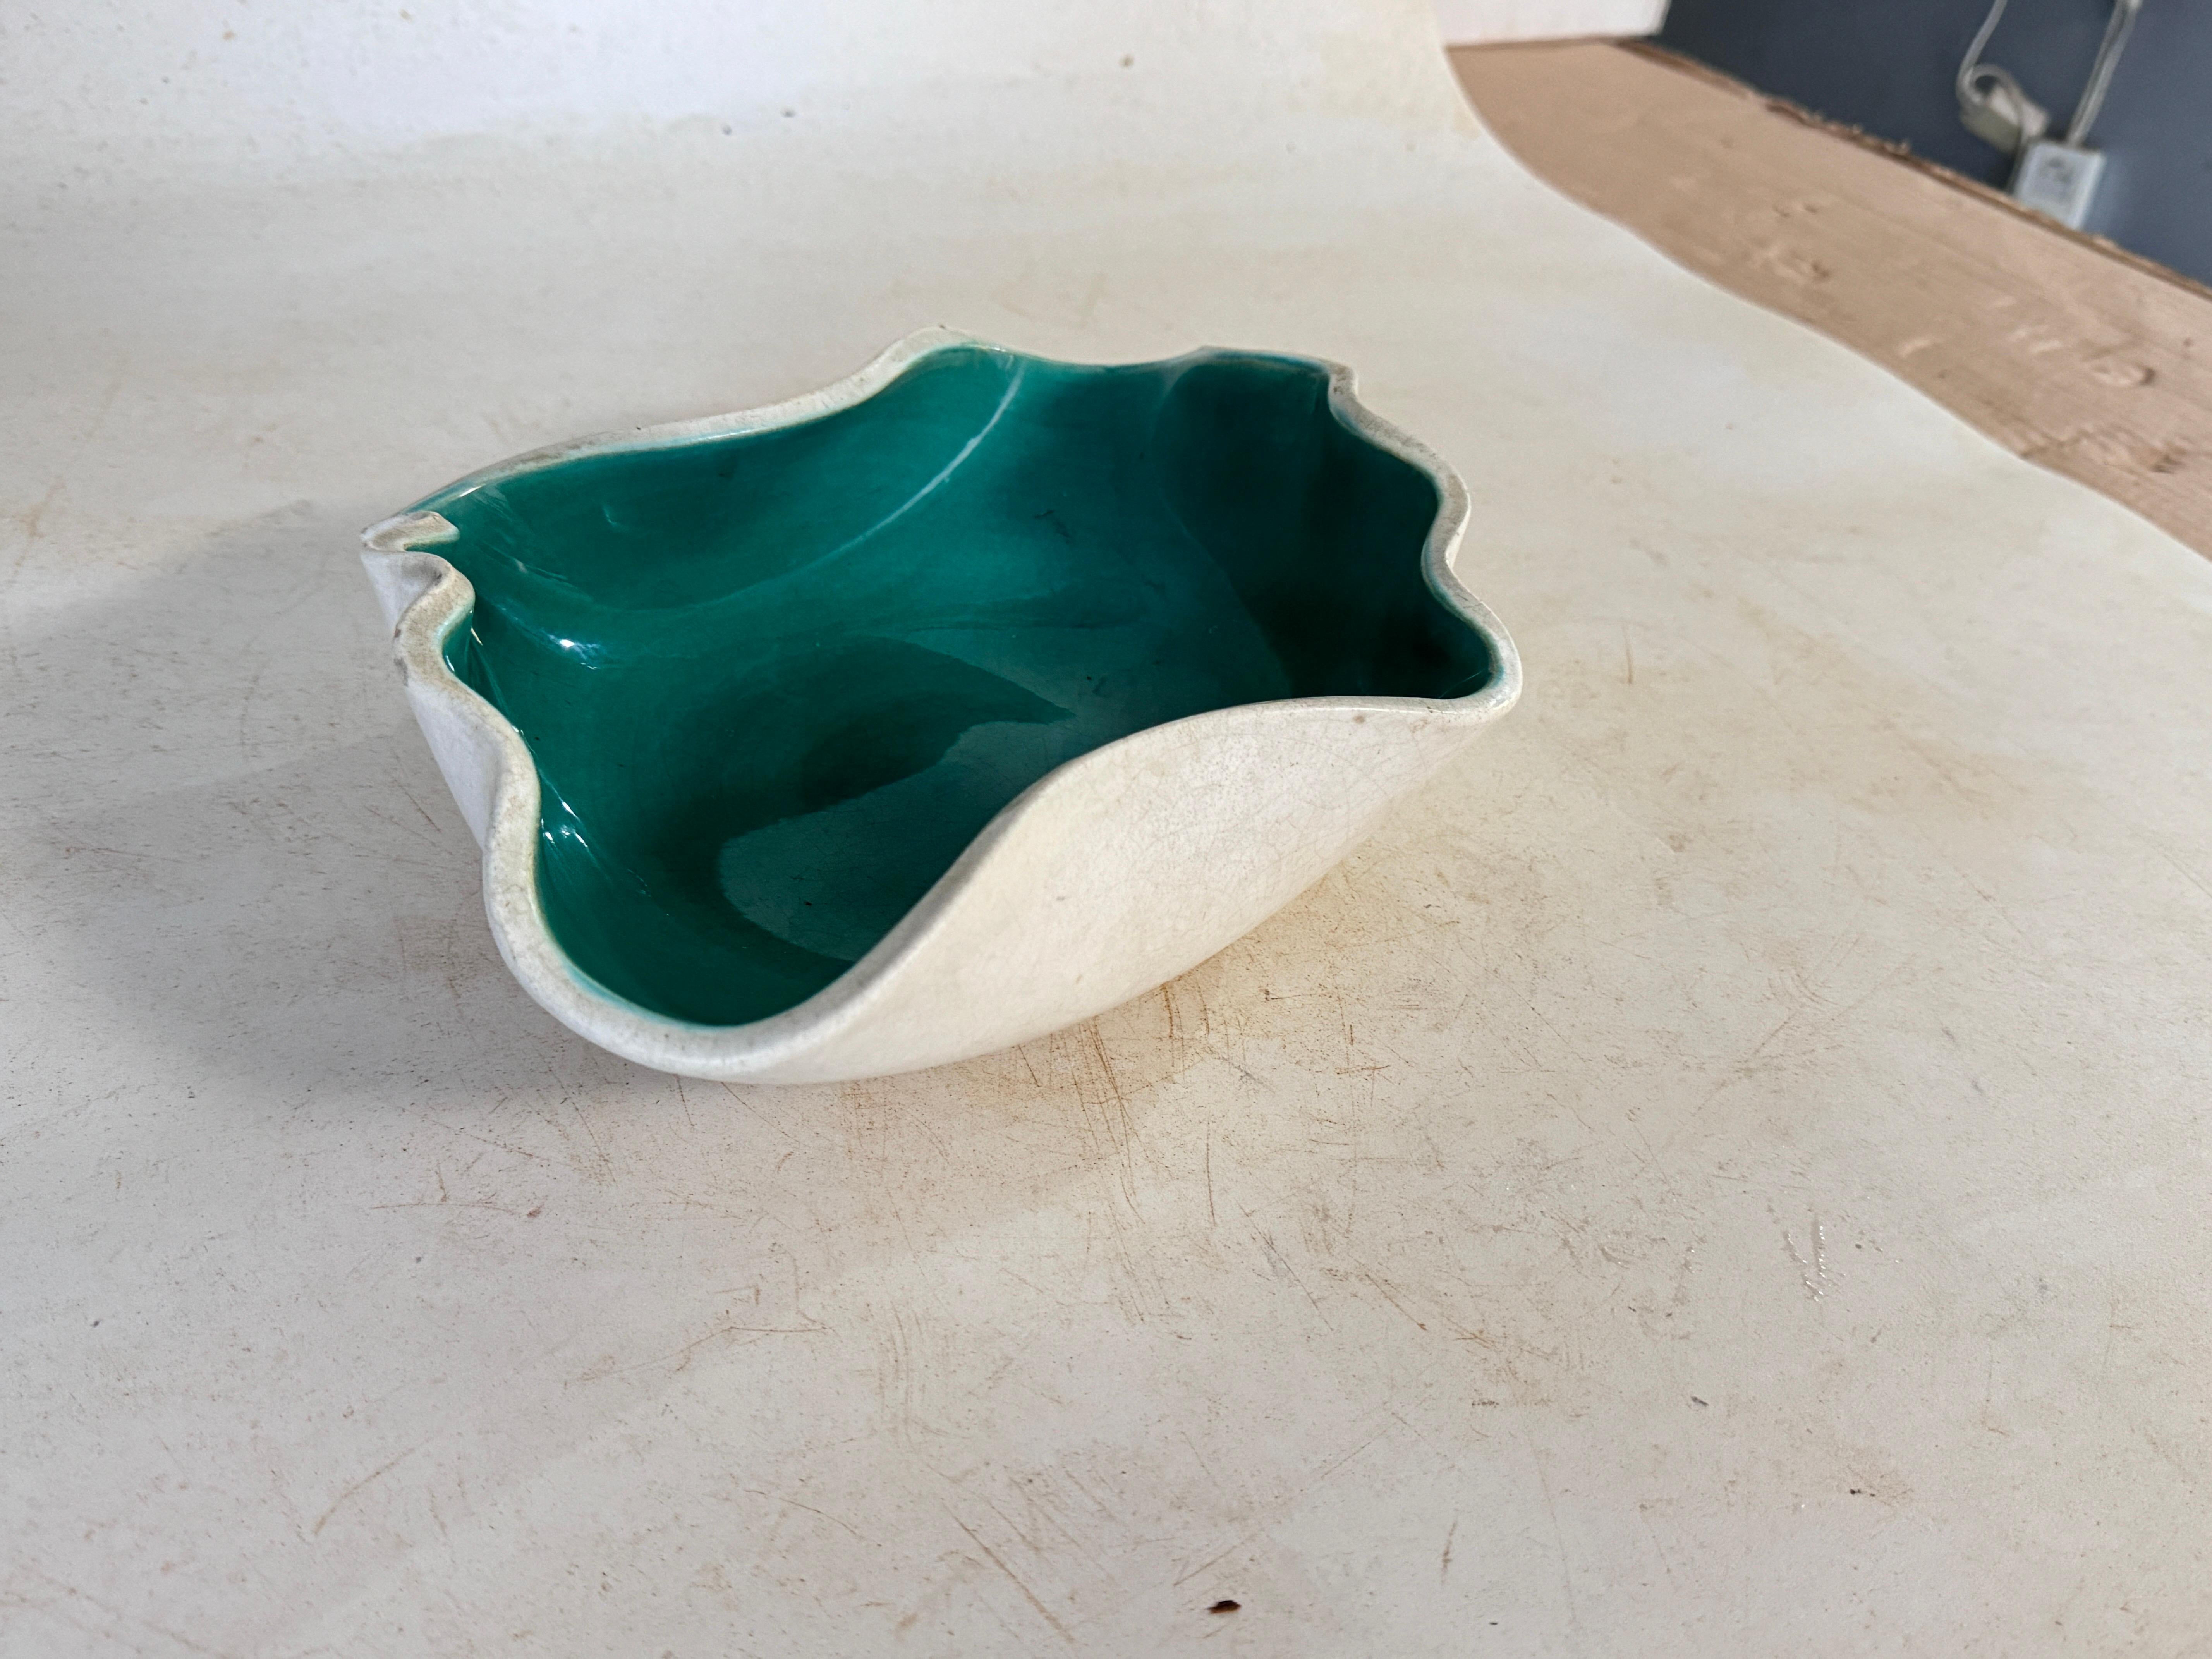 Mid-Century French Decorative Ceramic Dish / Vide-Poche by Elchinger 1960s Green In Good Condition For Sale In Auribeau sur Siagne, FR